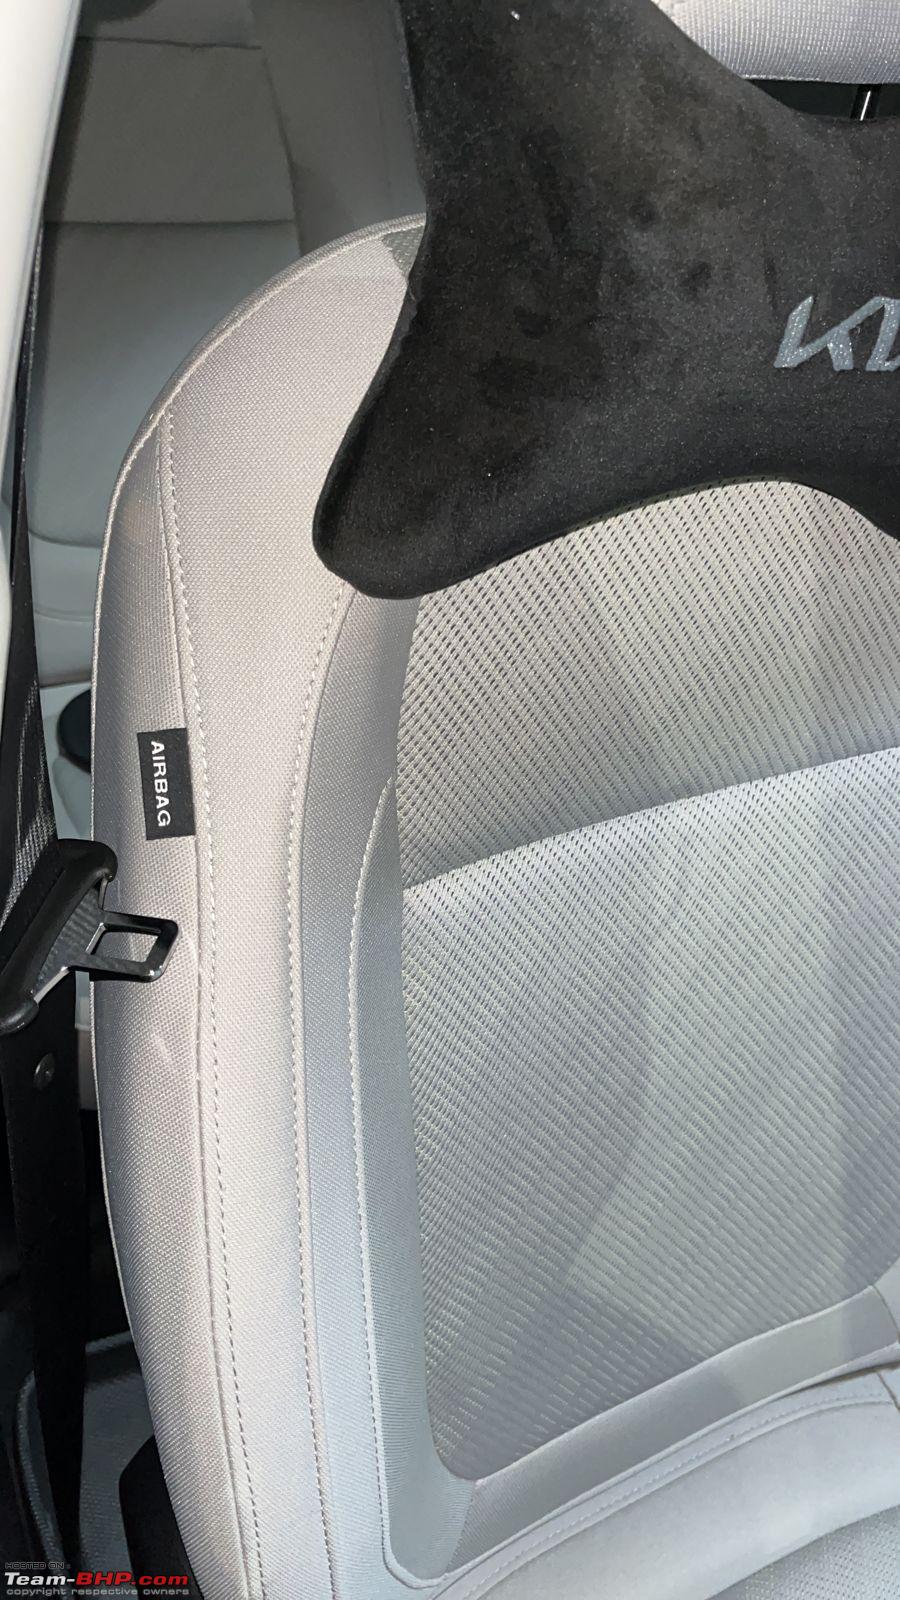 Are Car Seat Covers Safe to Use?